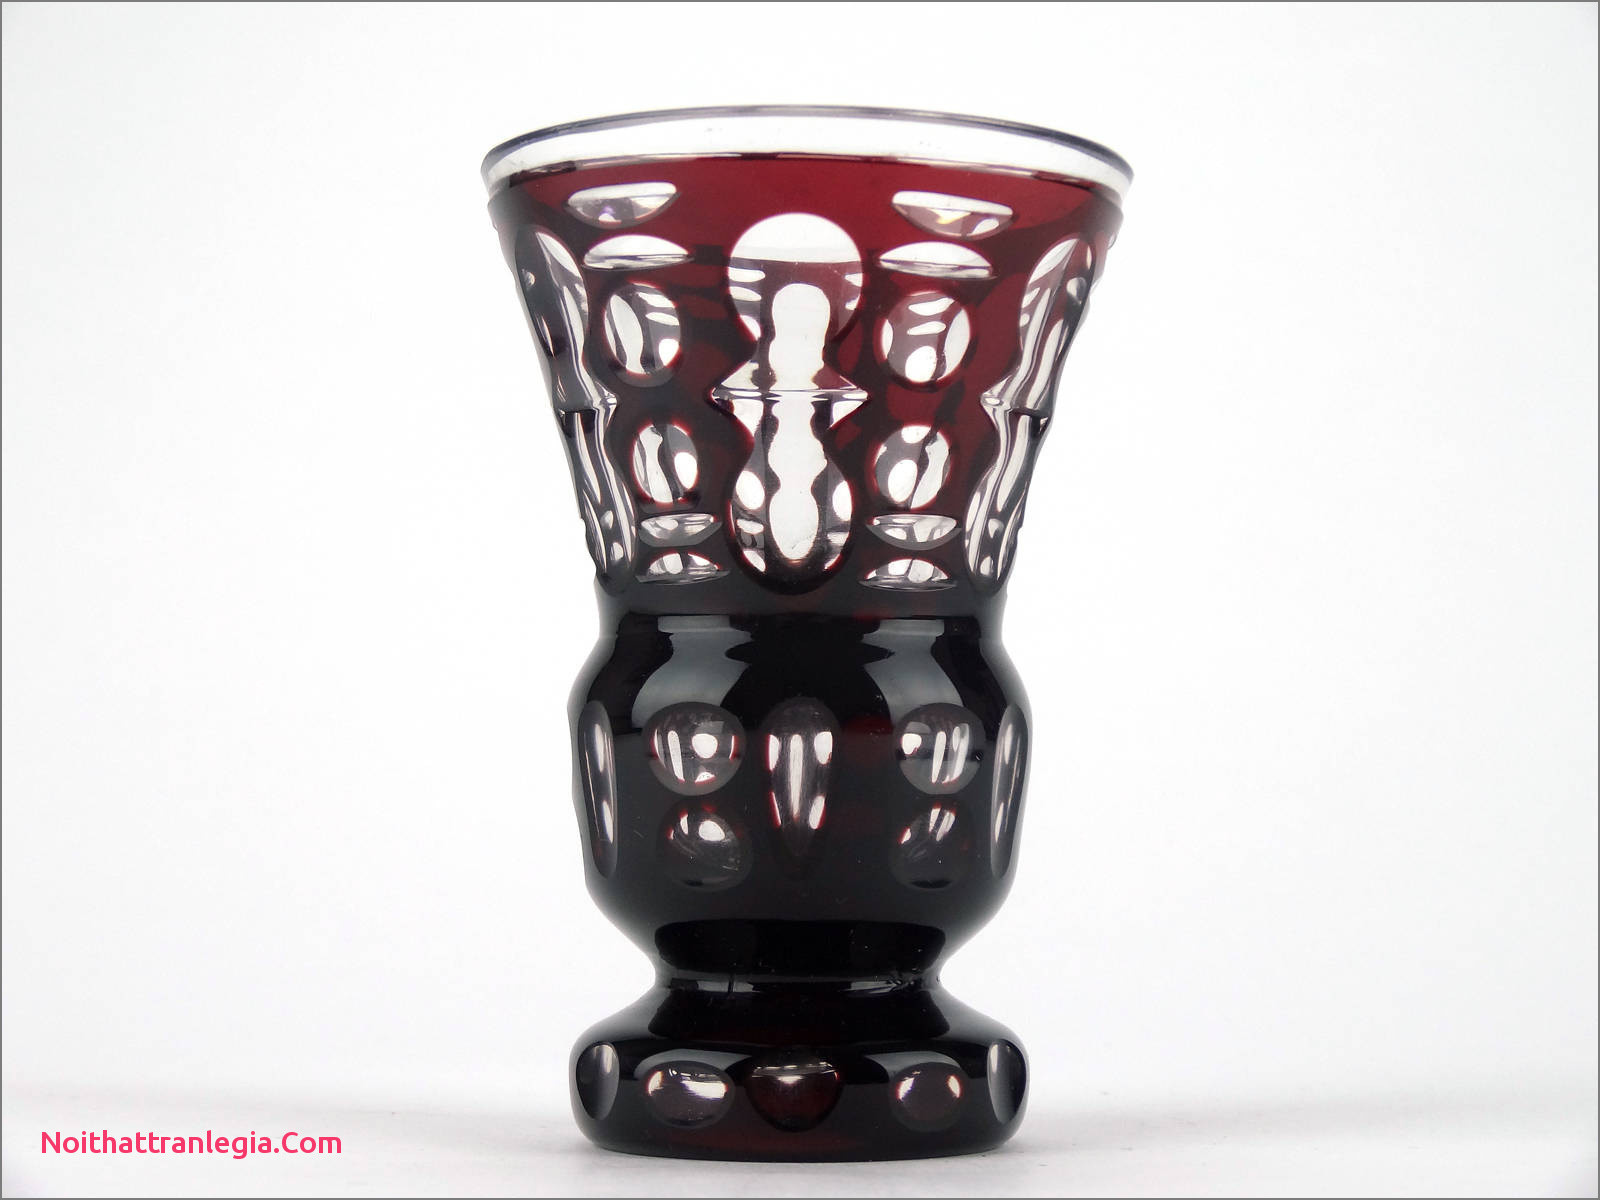 26 Lovely Ruby Red Bud Vase 2024 free download ruby red bud vase of 20 cut glass antique vase noithattranlegia vases design in antique c1910 bohemian cut to clear red glass vase czech ruby red cut glass goblet